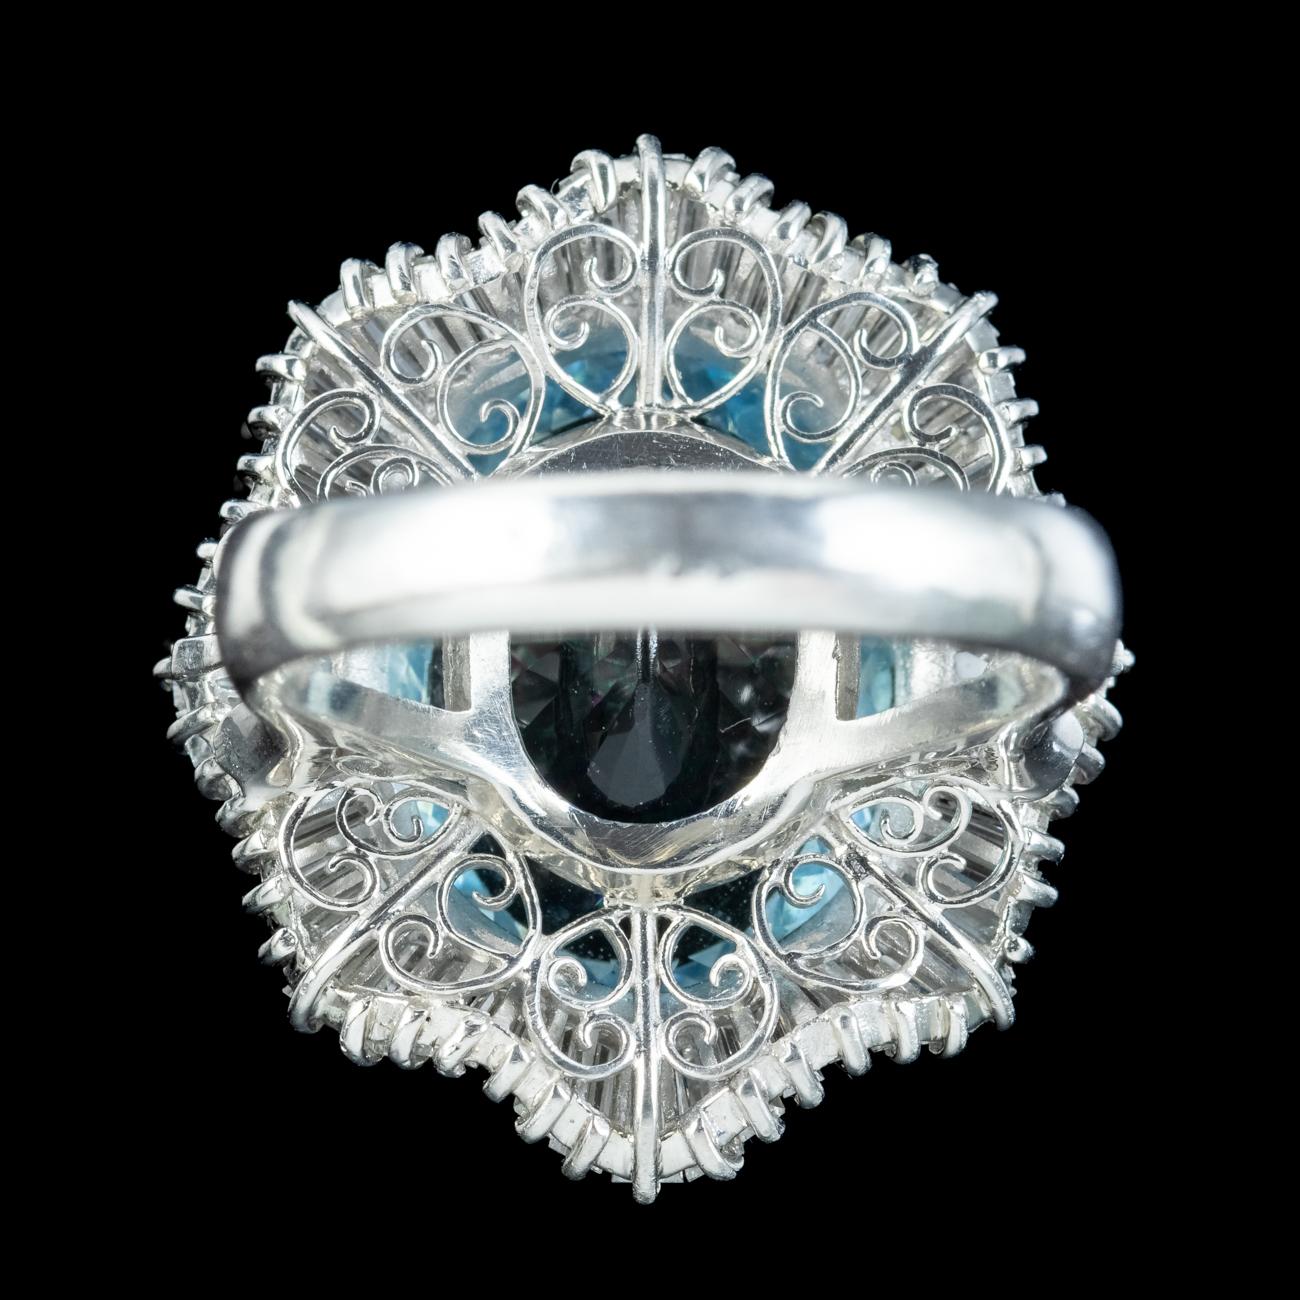 Vintage Aquamarine Diamond Cocktail Ring 13.92ct Aqua 2.95ct Diamond With Cert In Good Condition For Sale In Kendal, GB